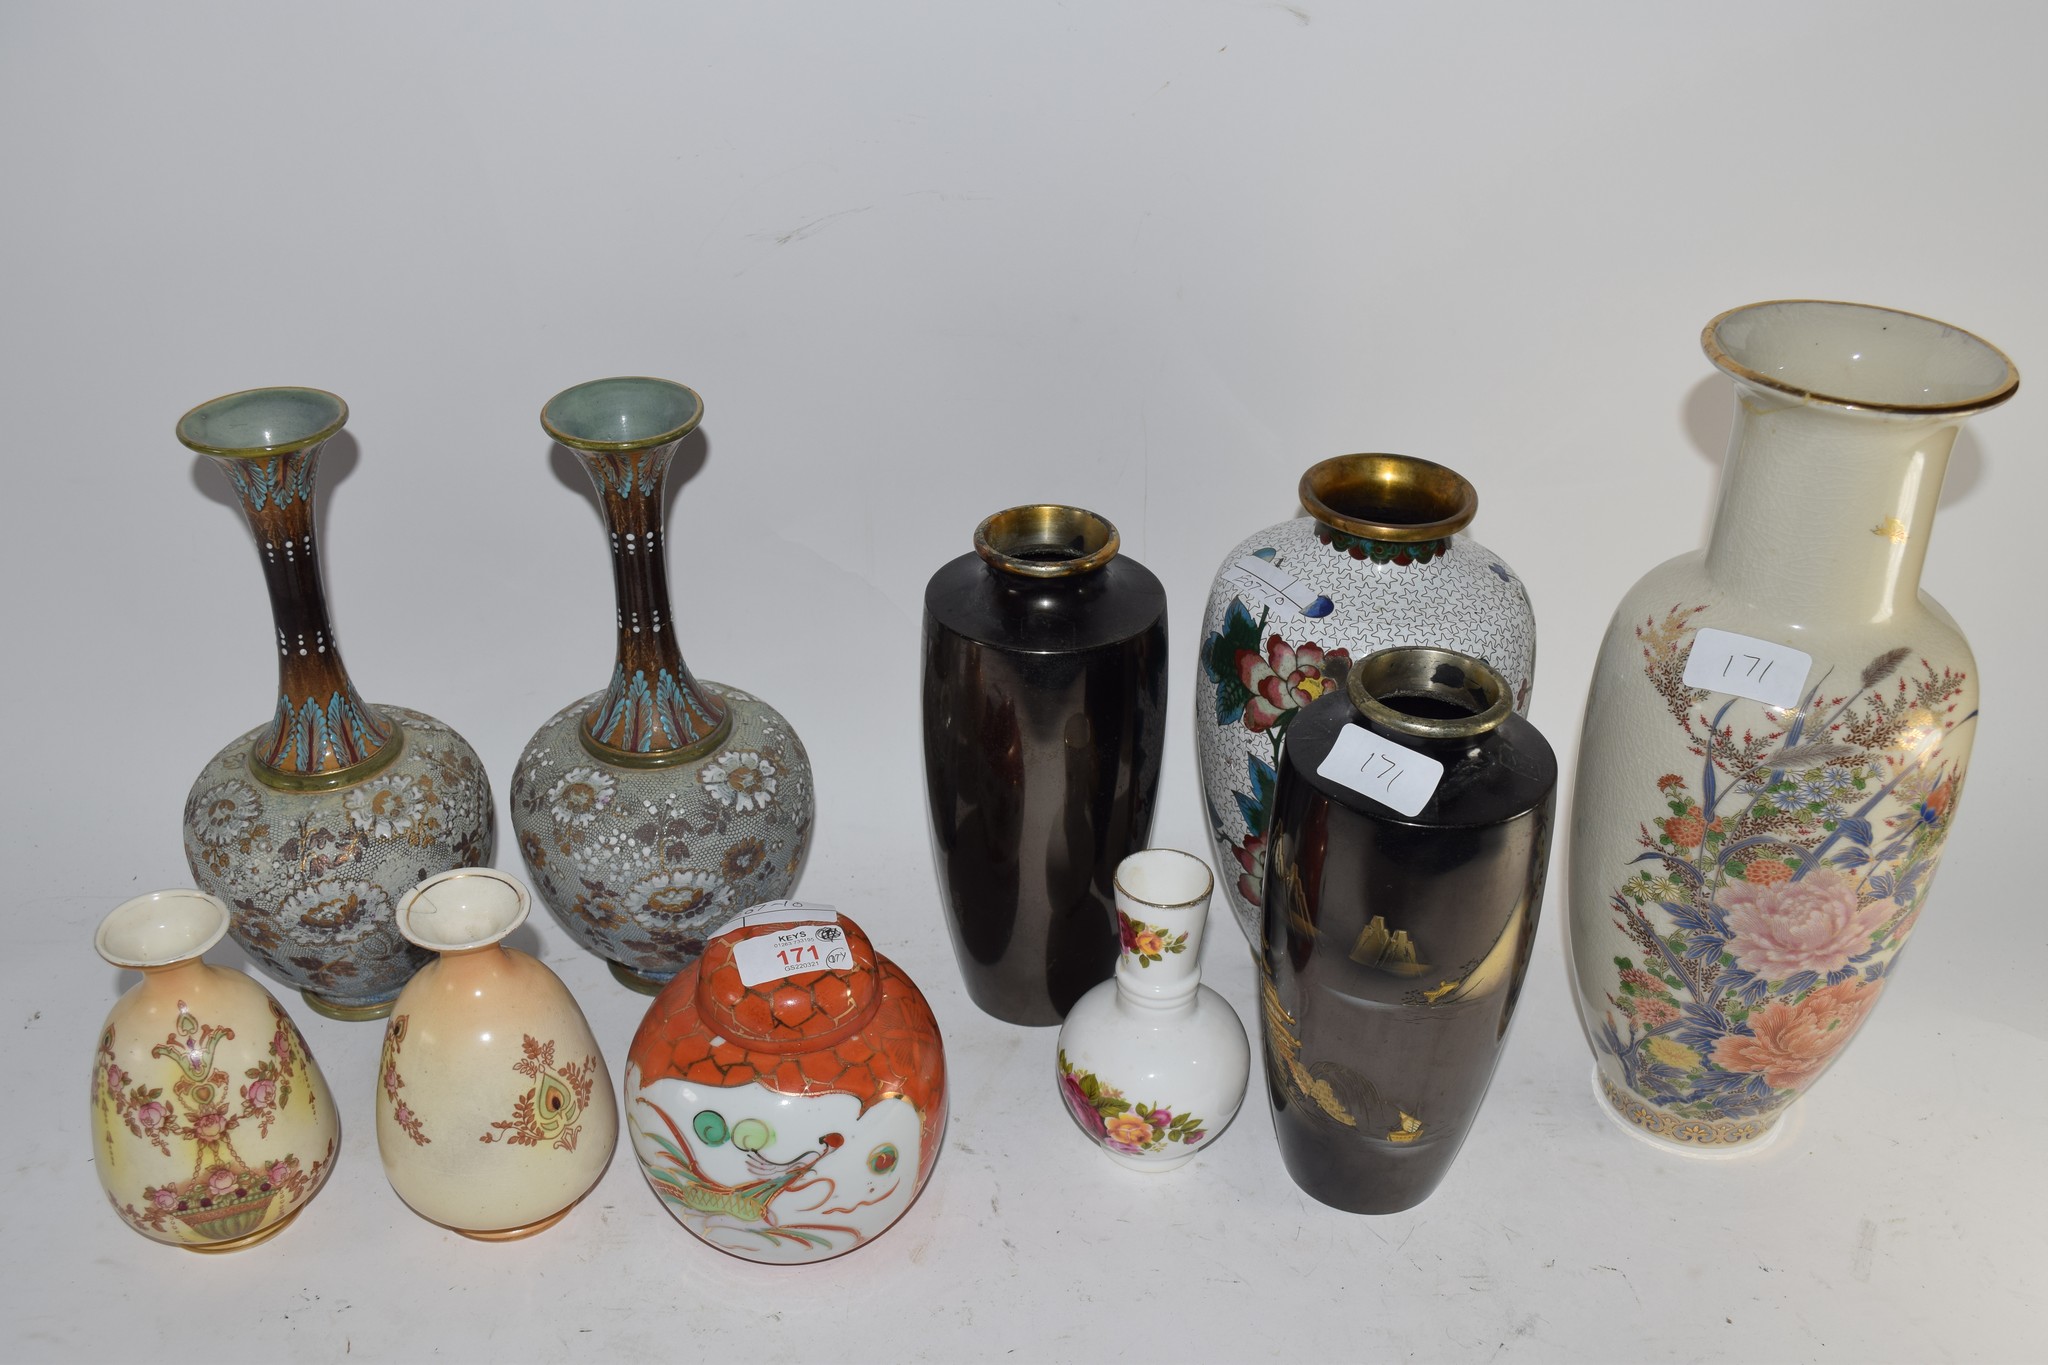 VASES INCLUDING PAIR OF DOULTON SLATERS PATENT VASES, PAIR OF JAPANESE METAL VASES WITH GILT